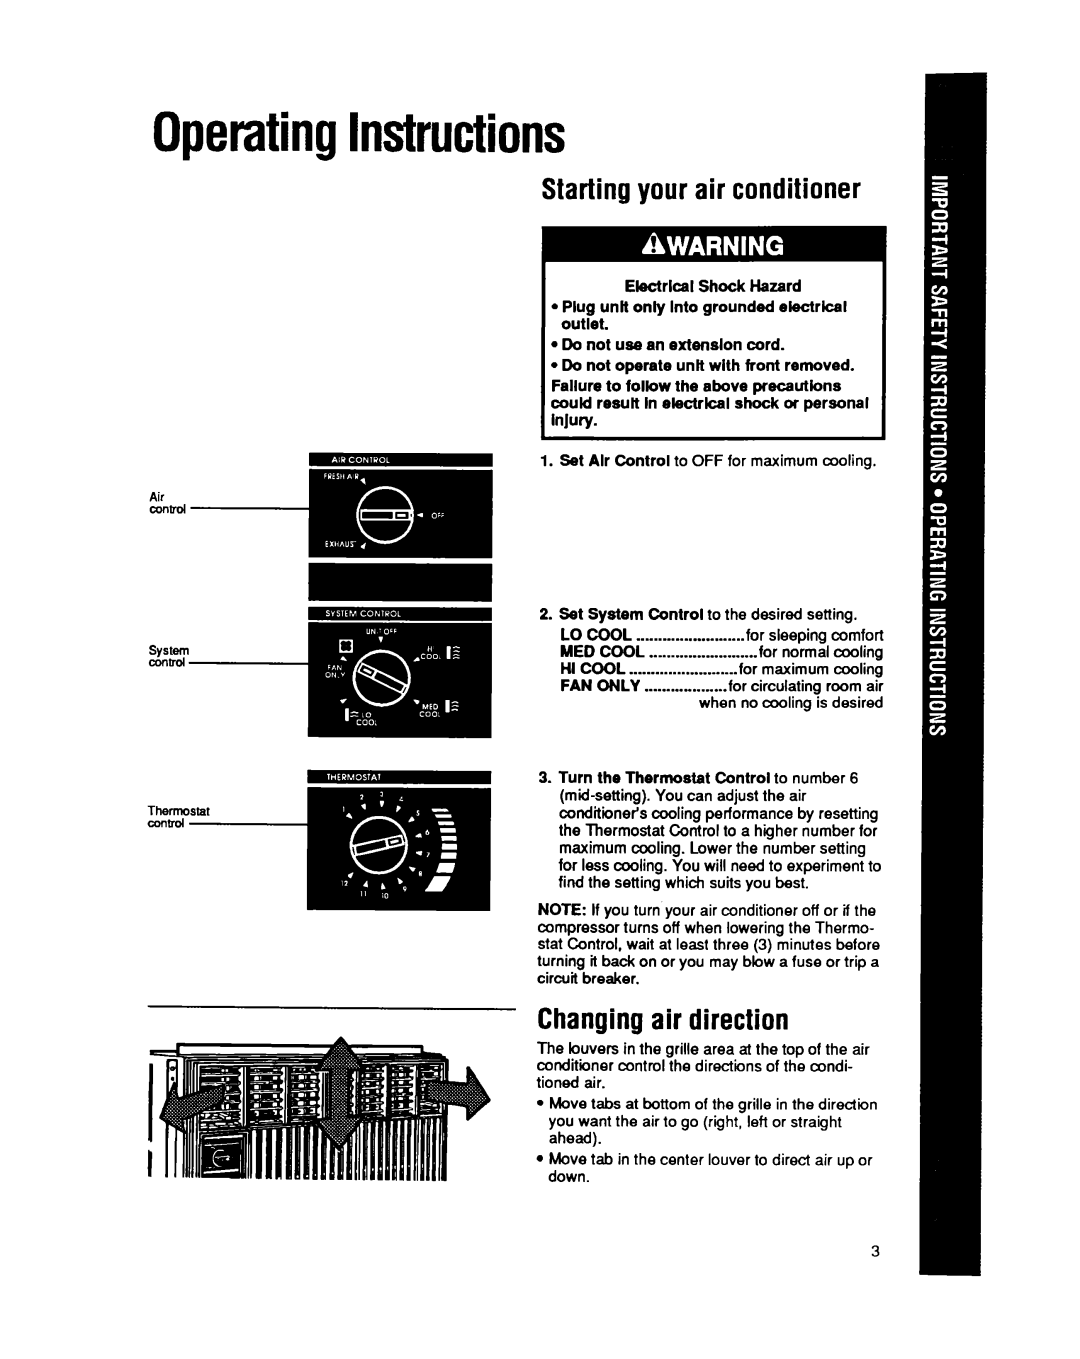 Whirlpool CA13WQ4 manual OperatingInstructions, Startingyour air conditioner, Changingair direction 